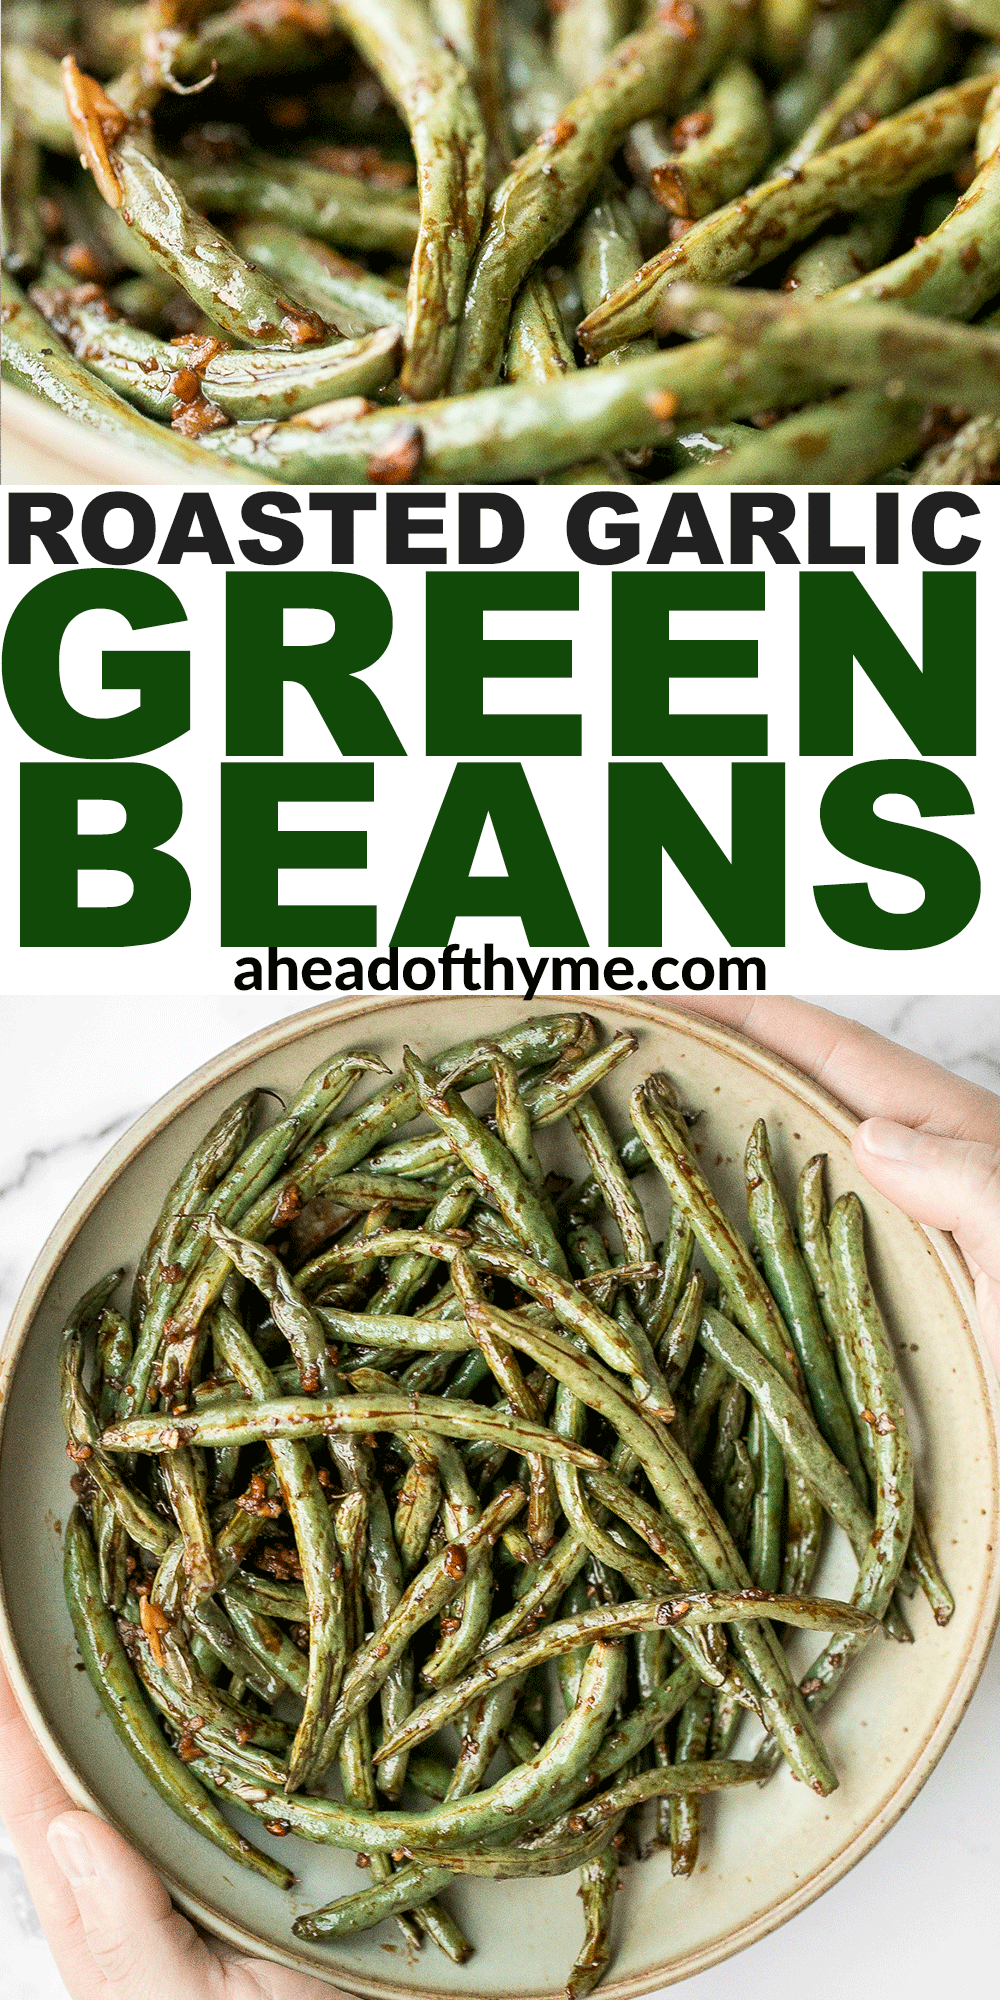 Roasted Garlic Green Beans (Air Fryer or Oven)